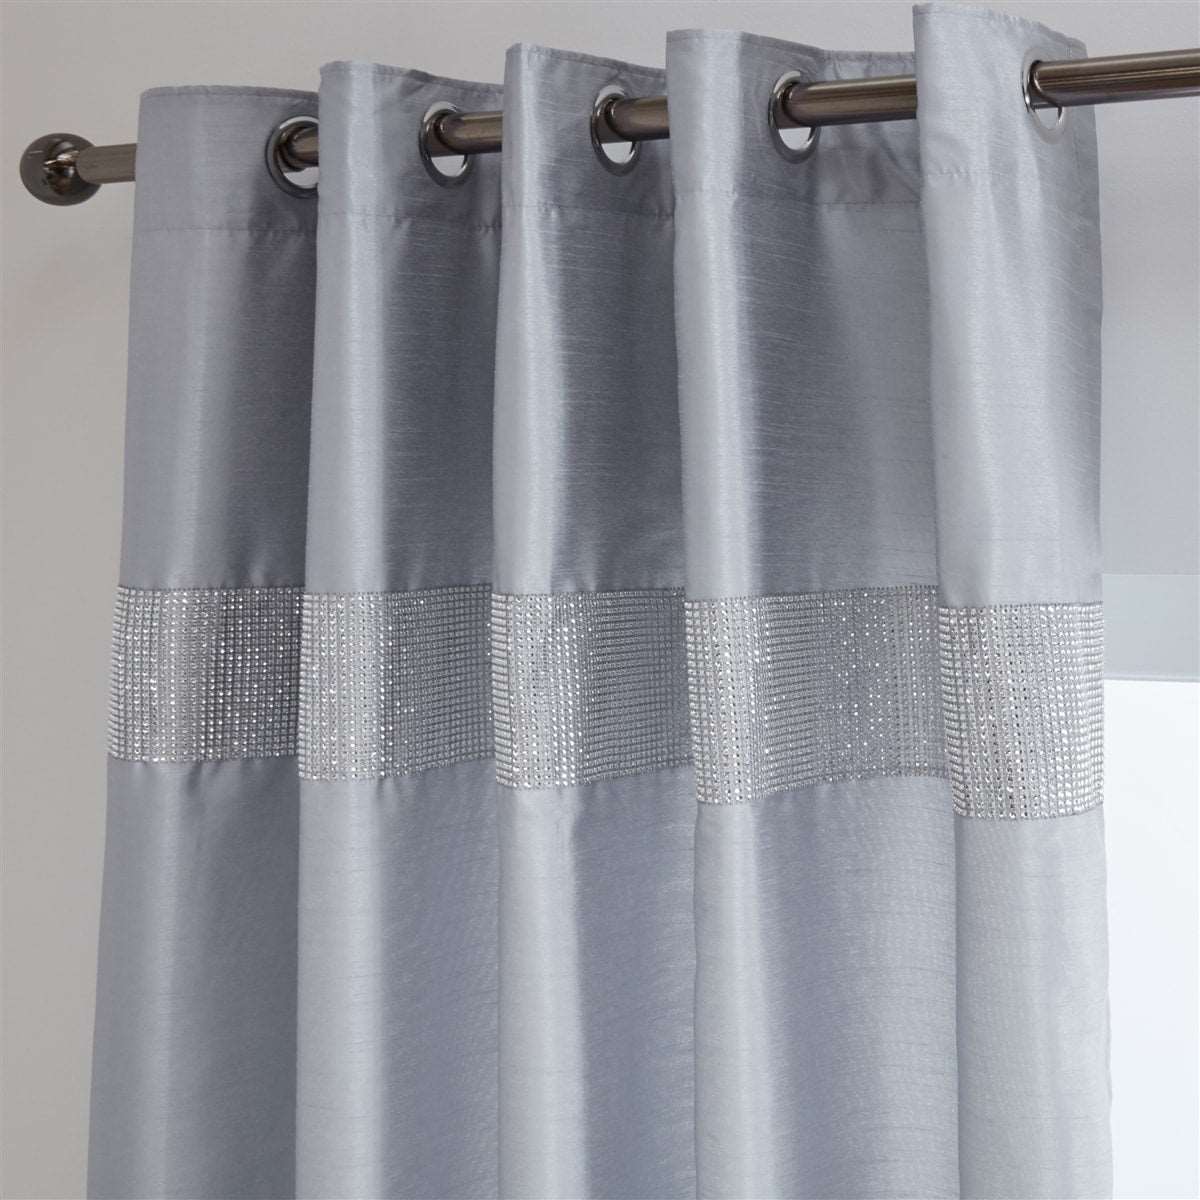 Diamante' Fully Lined Silver Faux Silk Ready Made Eyelet Curtains